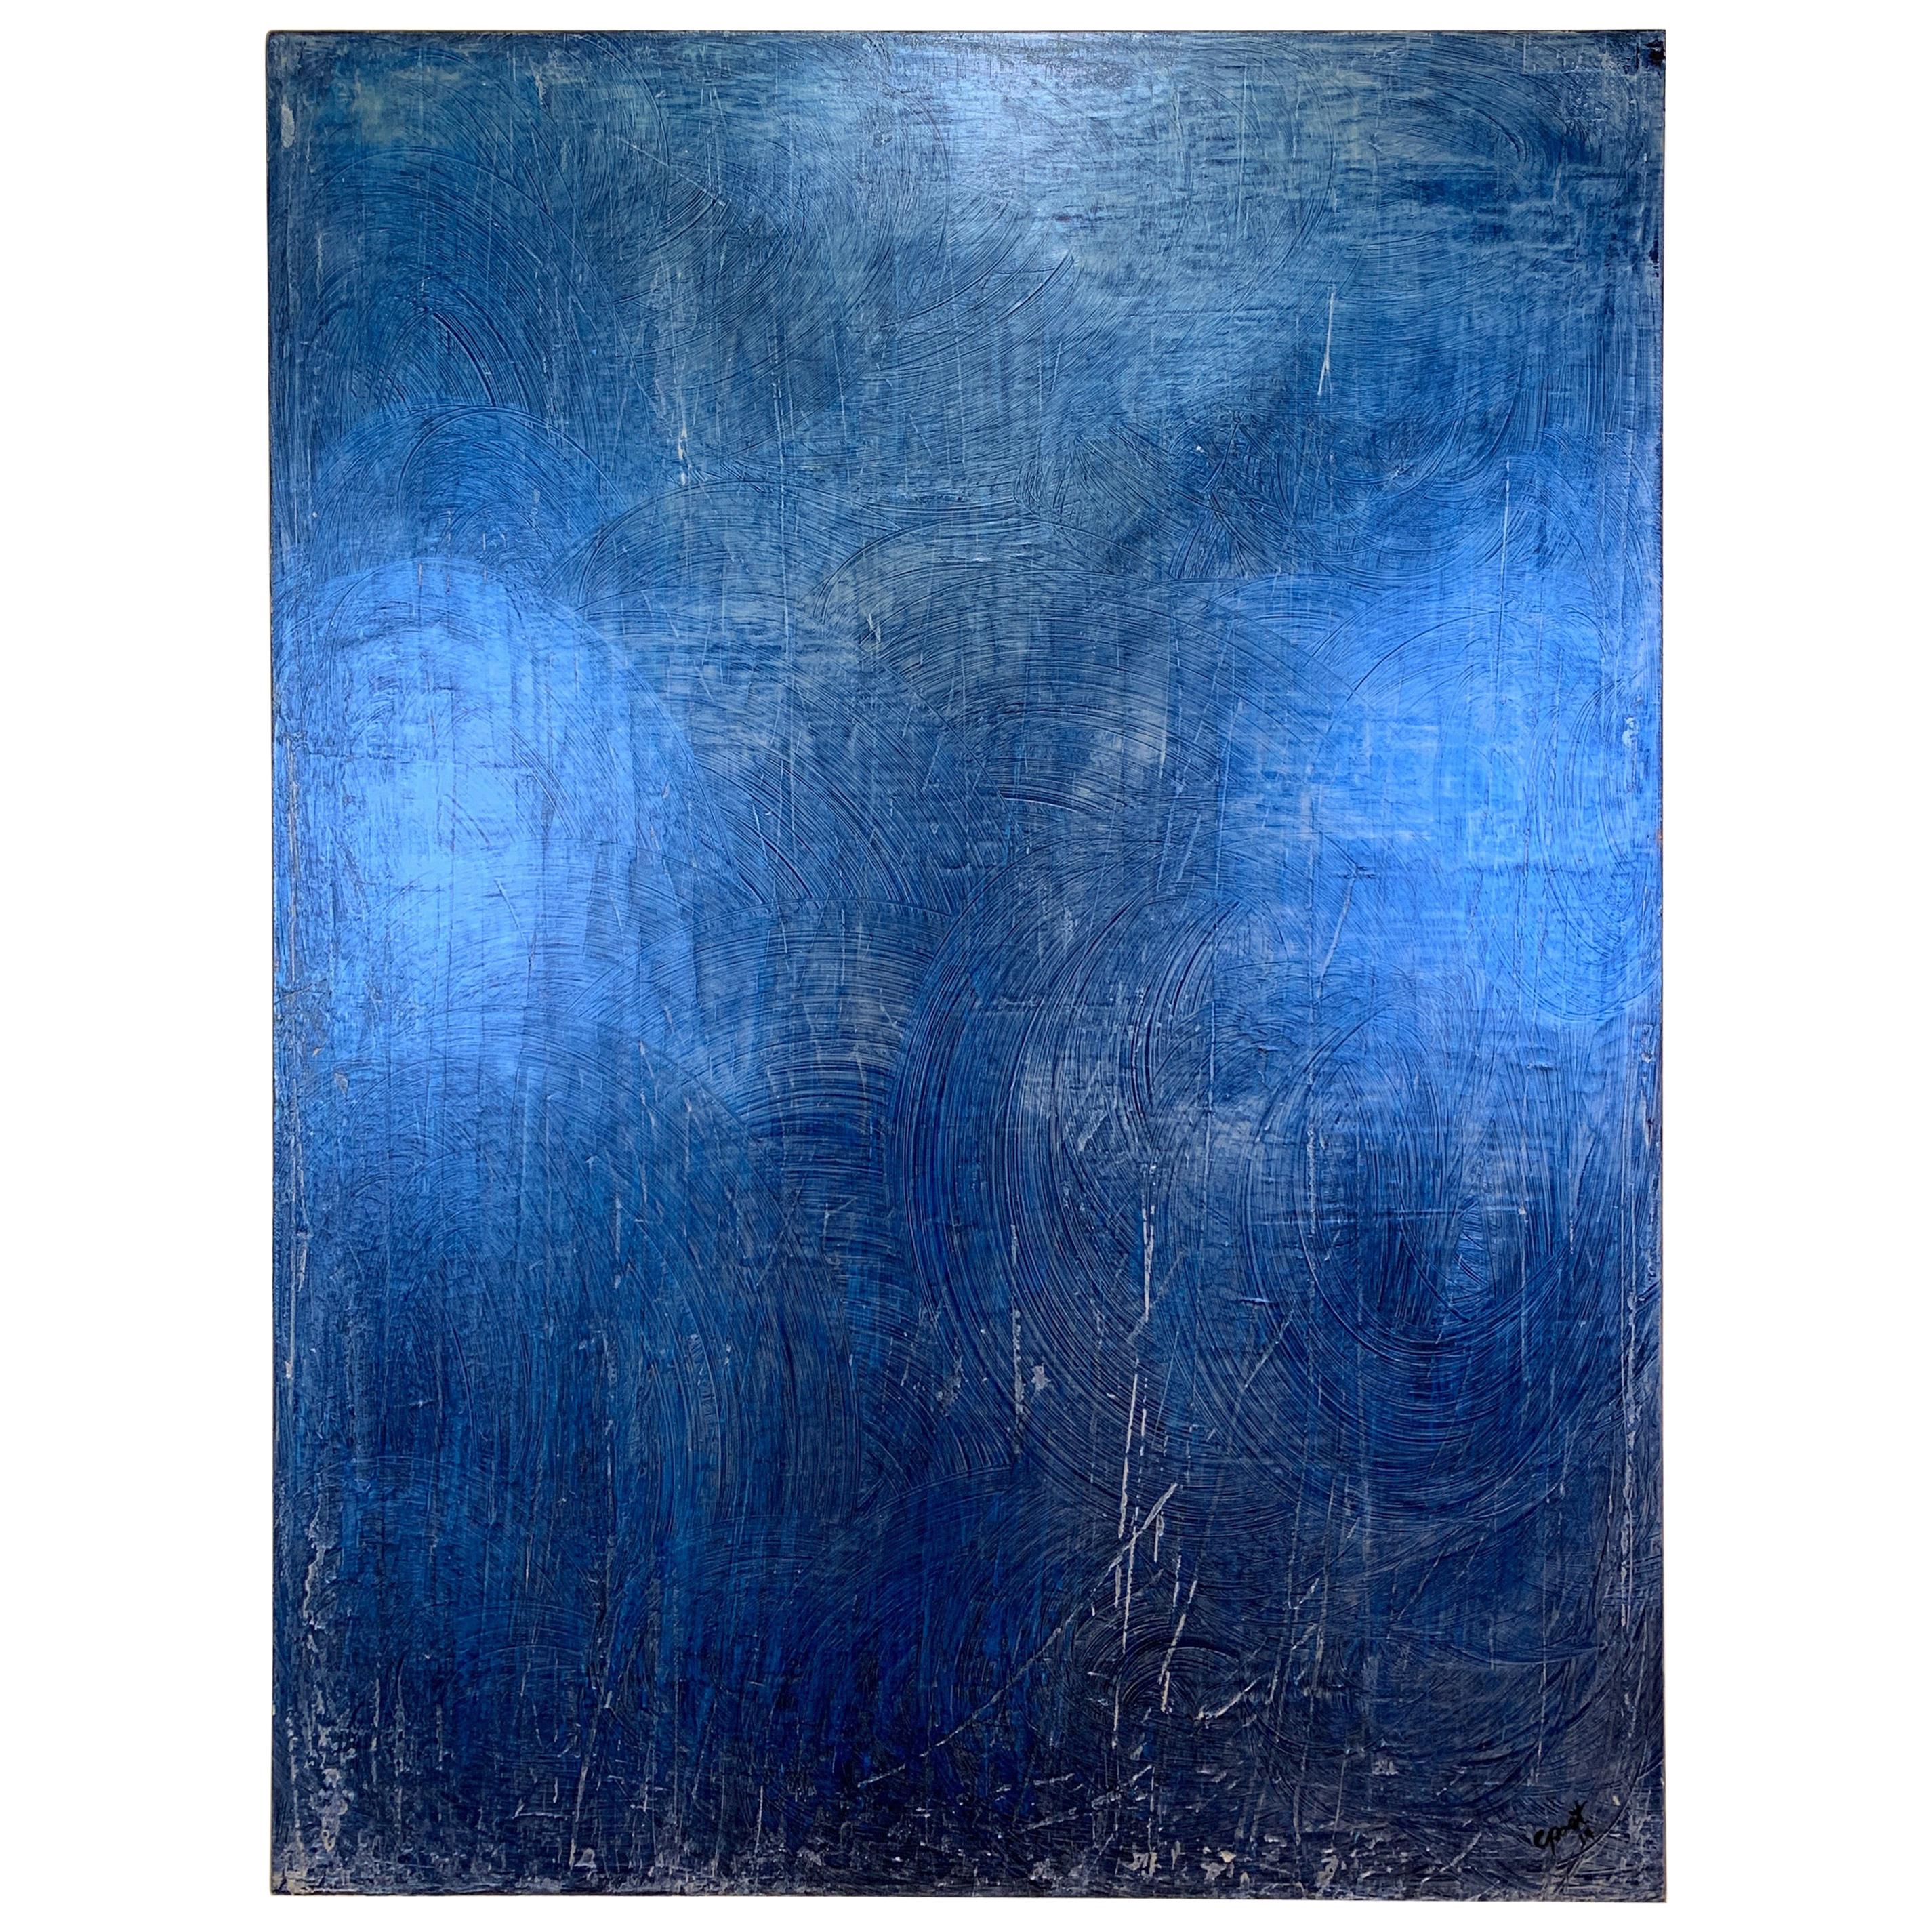 Blue Swirl, 2019, by Carol Post, Venetian Plaster and Acrylic on Canvas